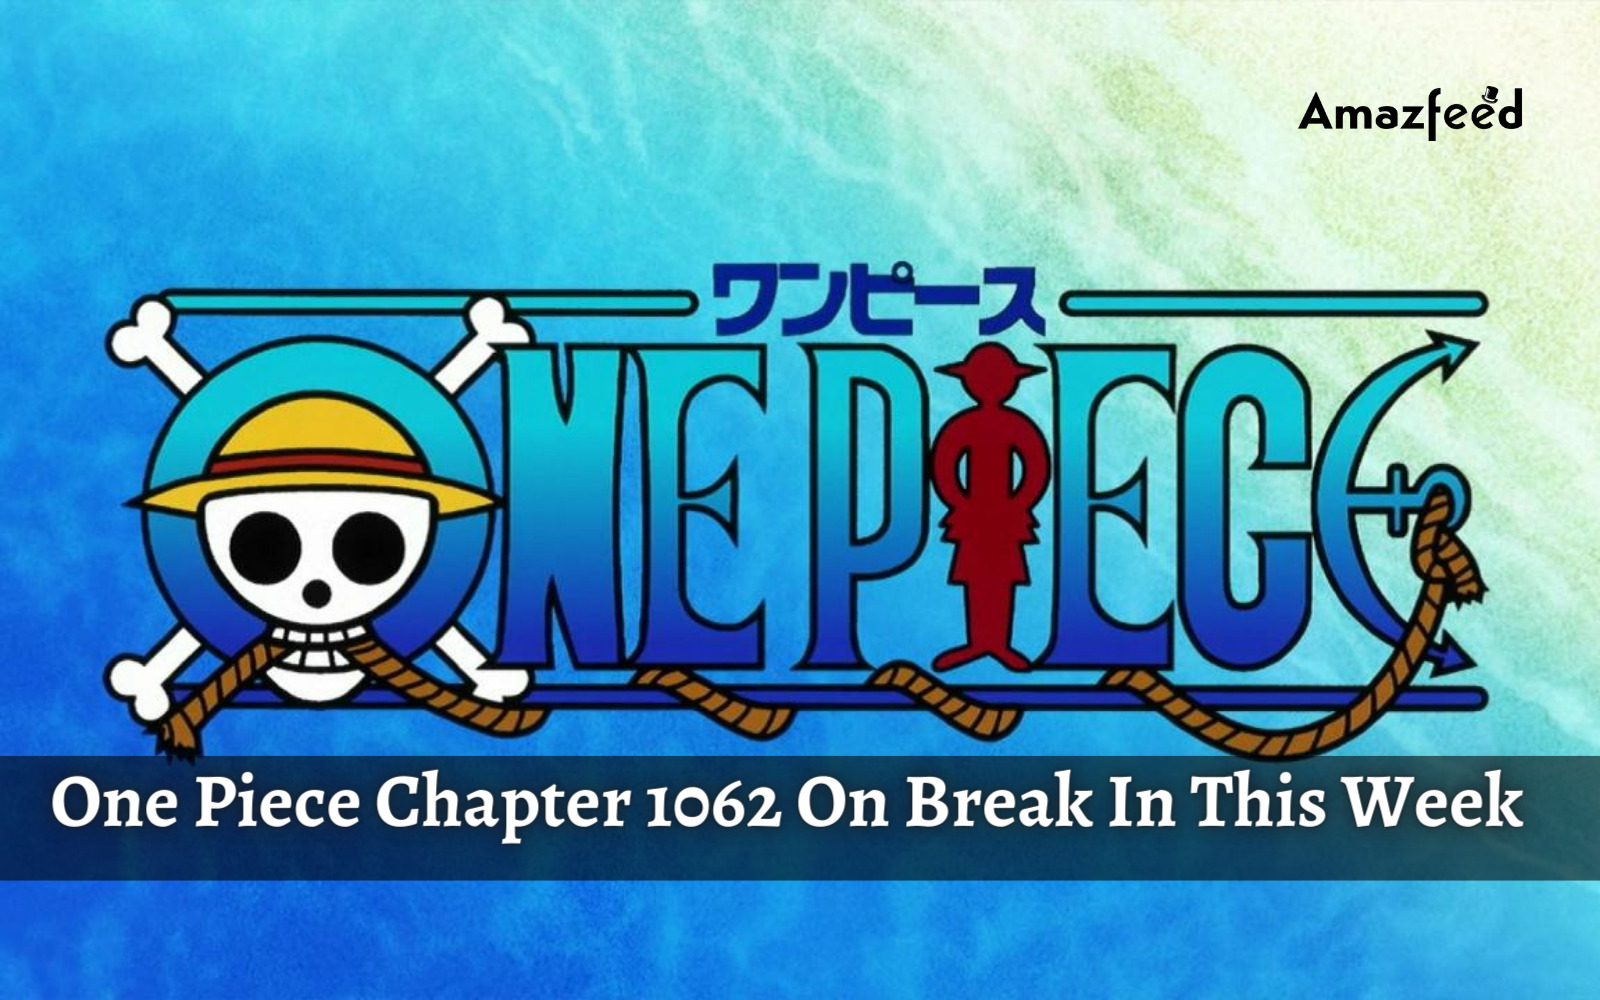 Is One Piece Chapter 1062 On Break This Week